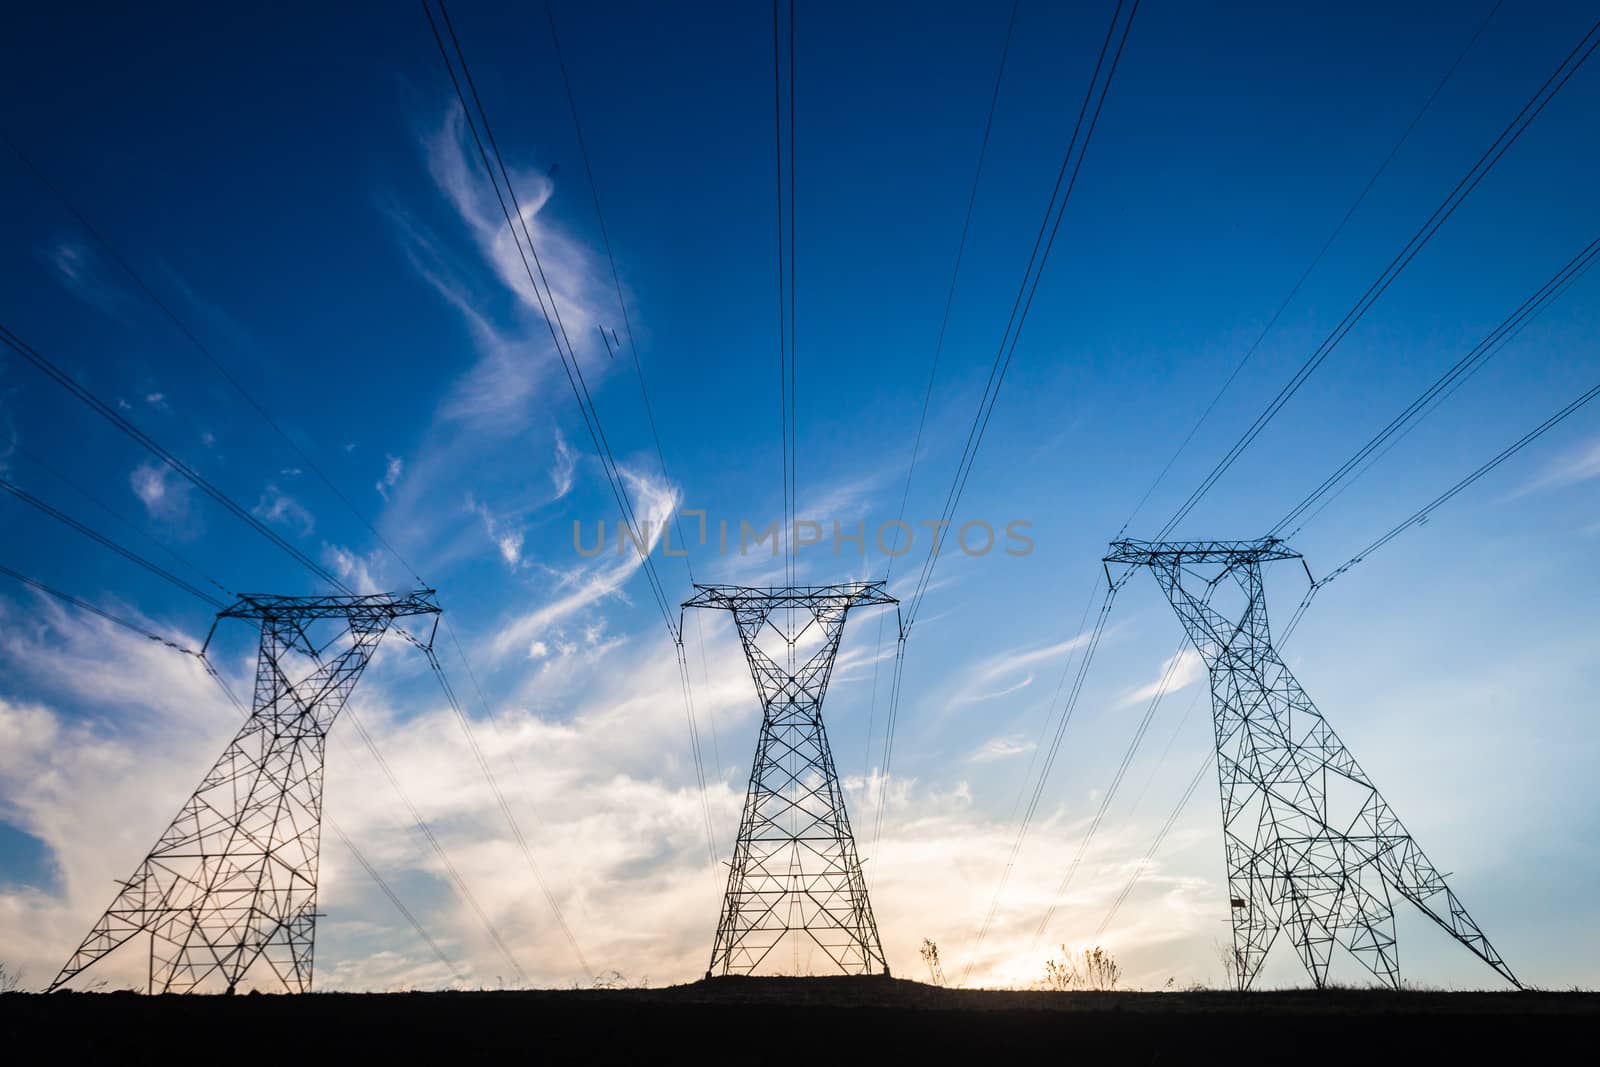 Electricity cables attached to steel structure towers transport electrical power supply over the countryside landscape